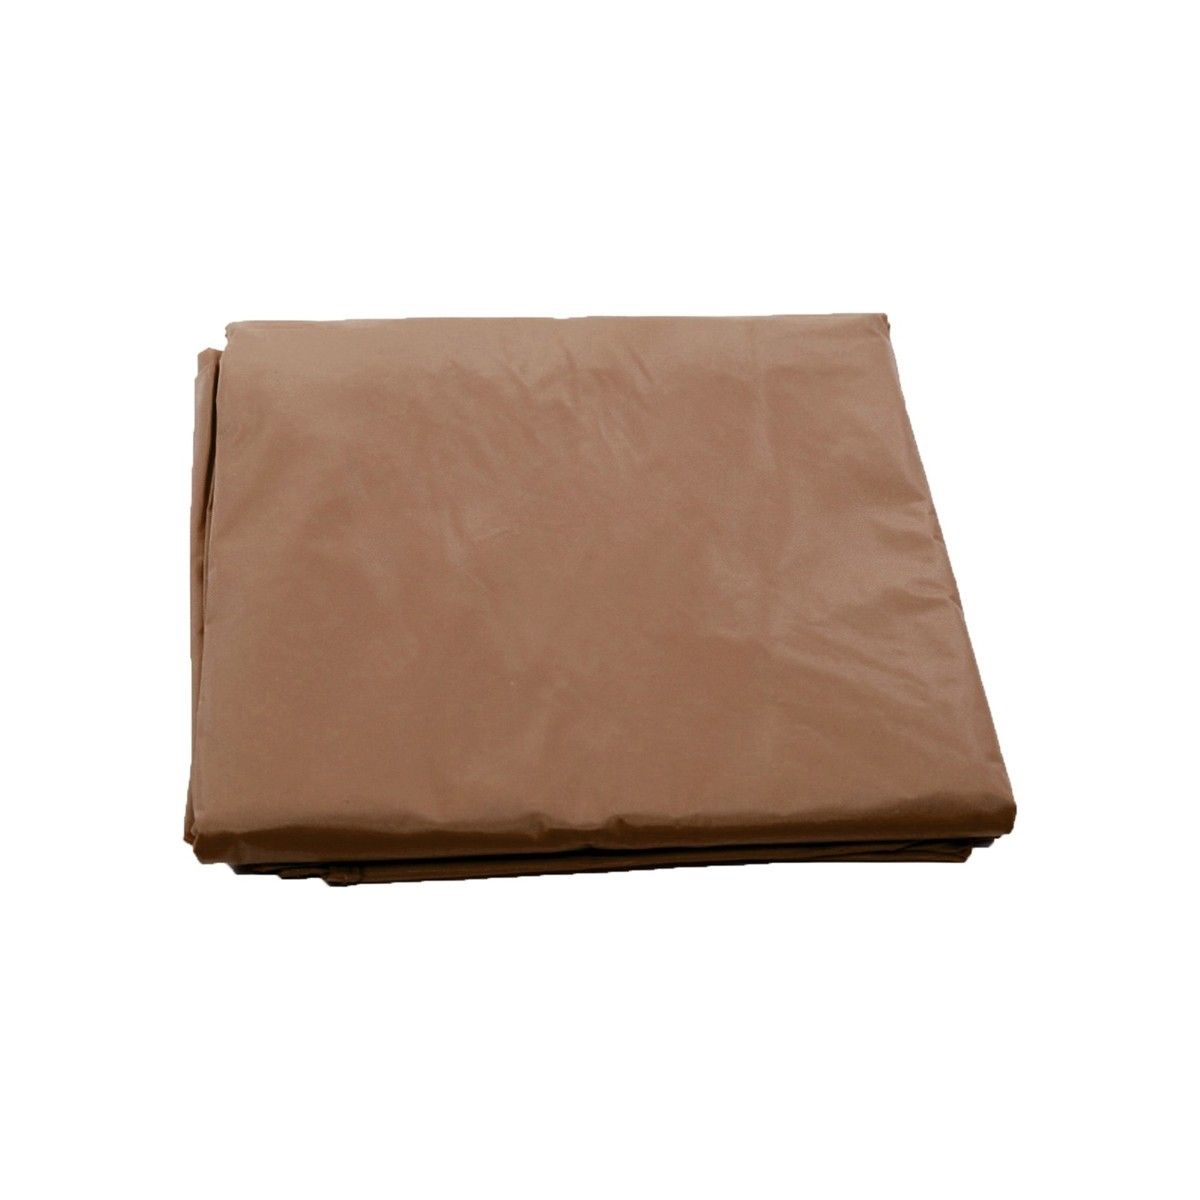 Imperial Billiards Accessories Imperial - 8' Dust Cover - Brown - 18-148BRN